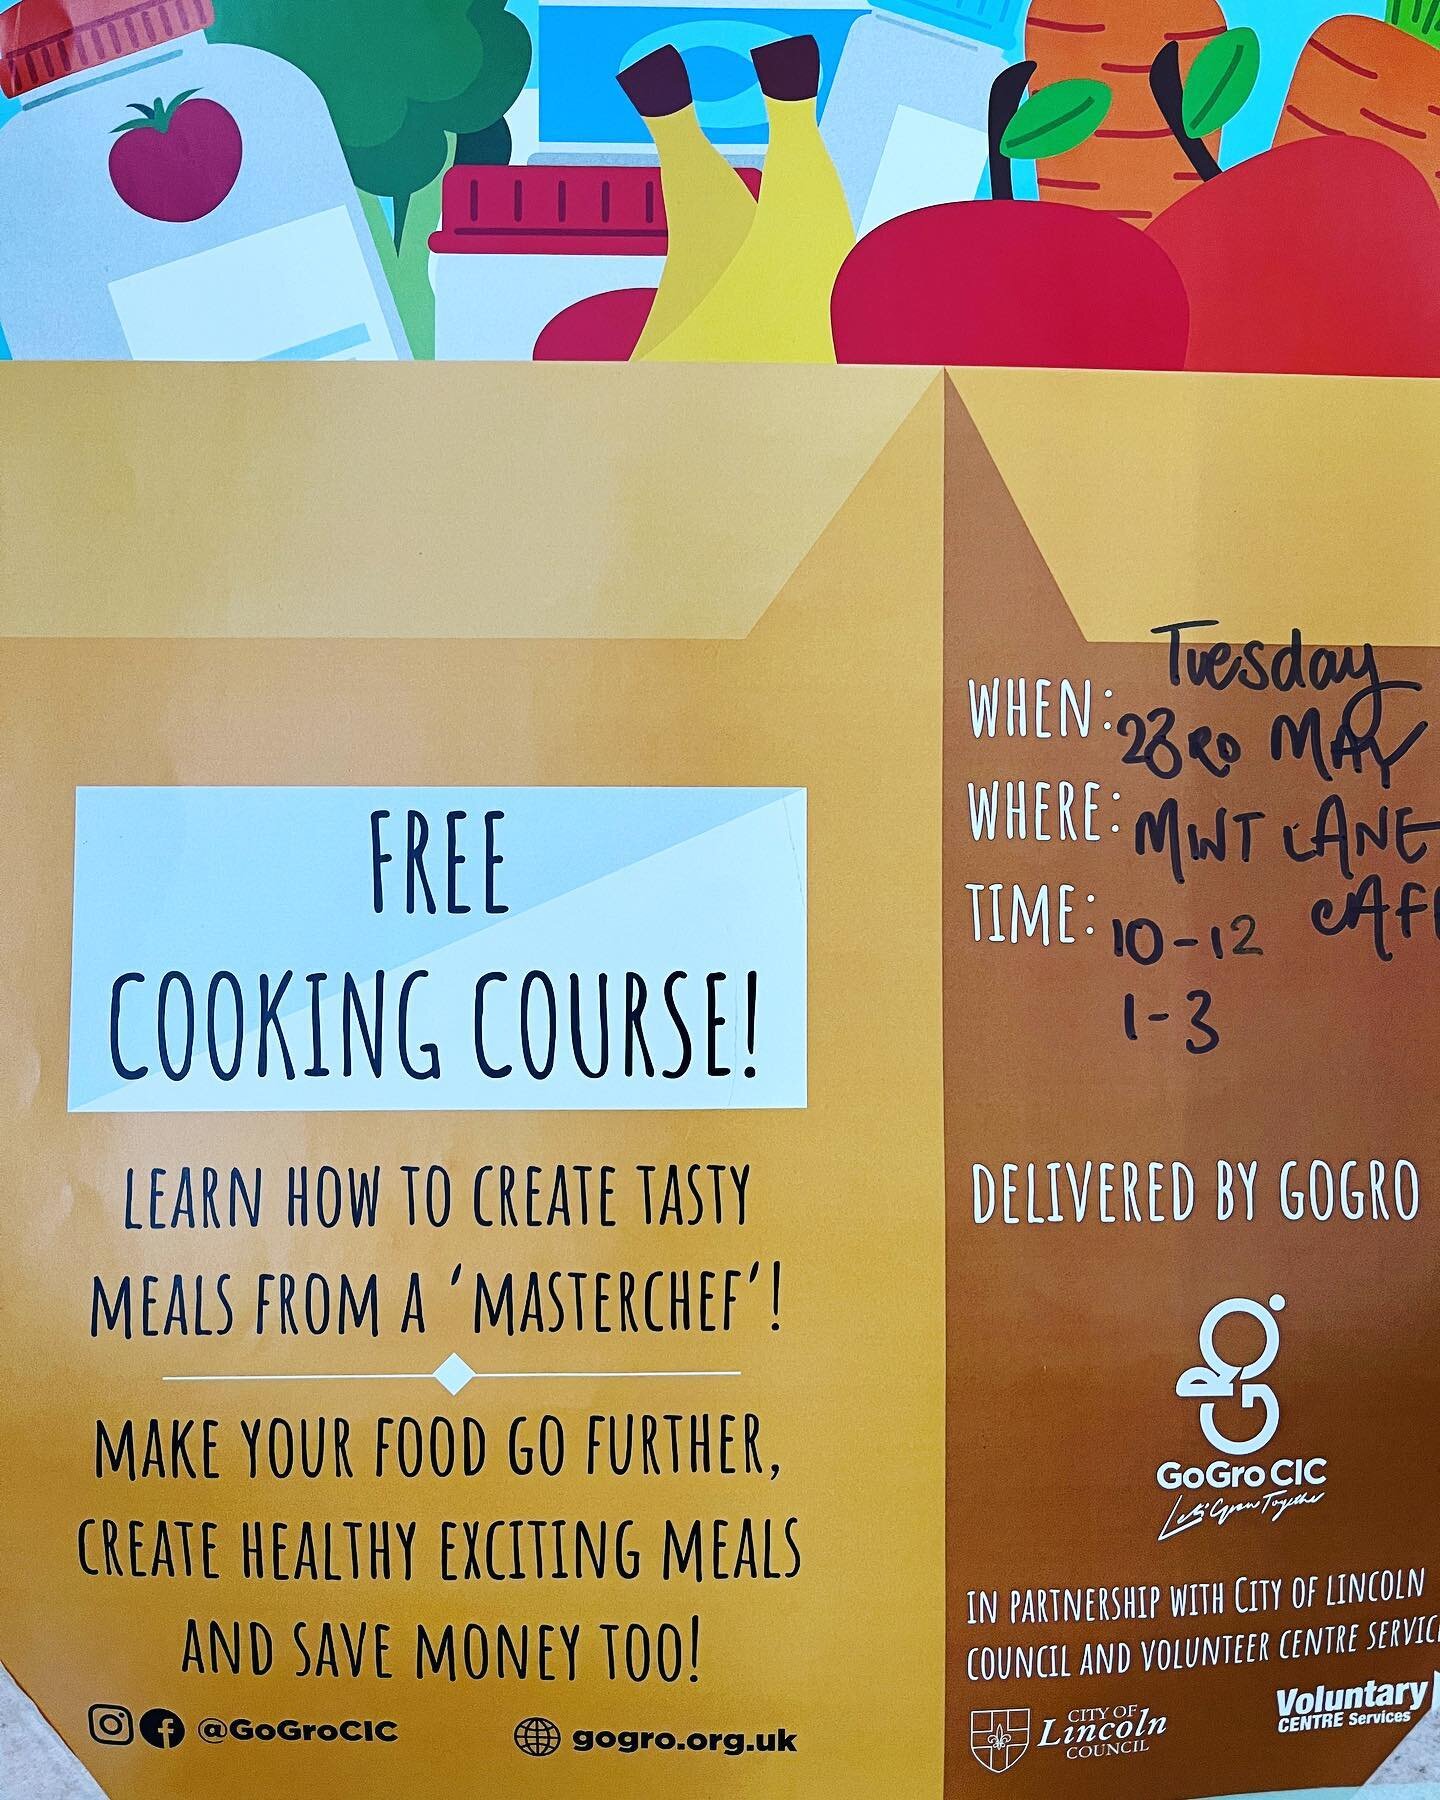 Coming up next Tuesday (23rd May) 
We have two FREE cookery classes hosted by the lads @gogrocic 
Great for any level of cook, the classes will focus on recipe ideas and cover some simple technical skills 
Just drop us a message or pop in the cafe to